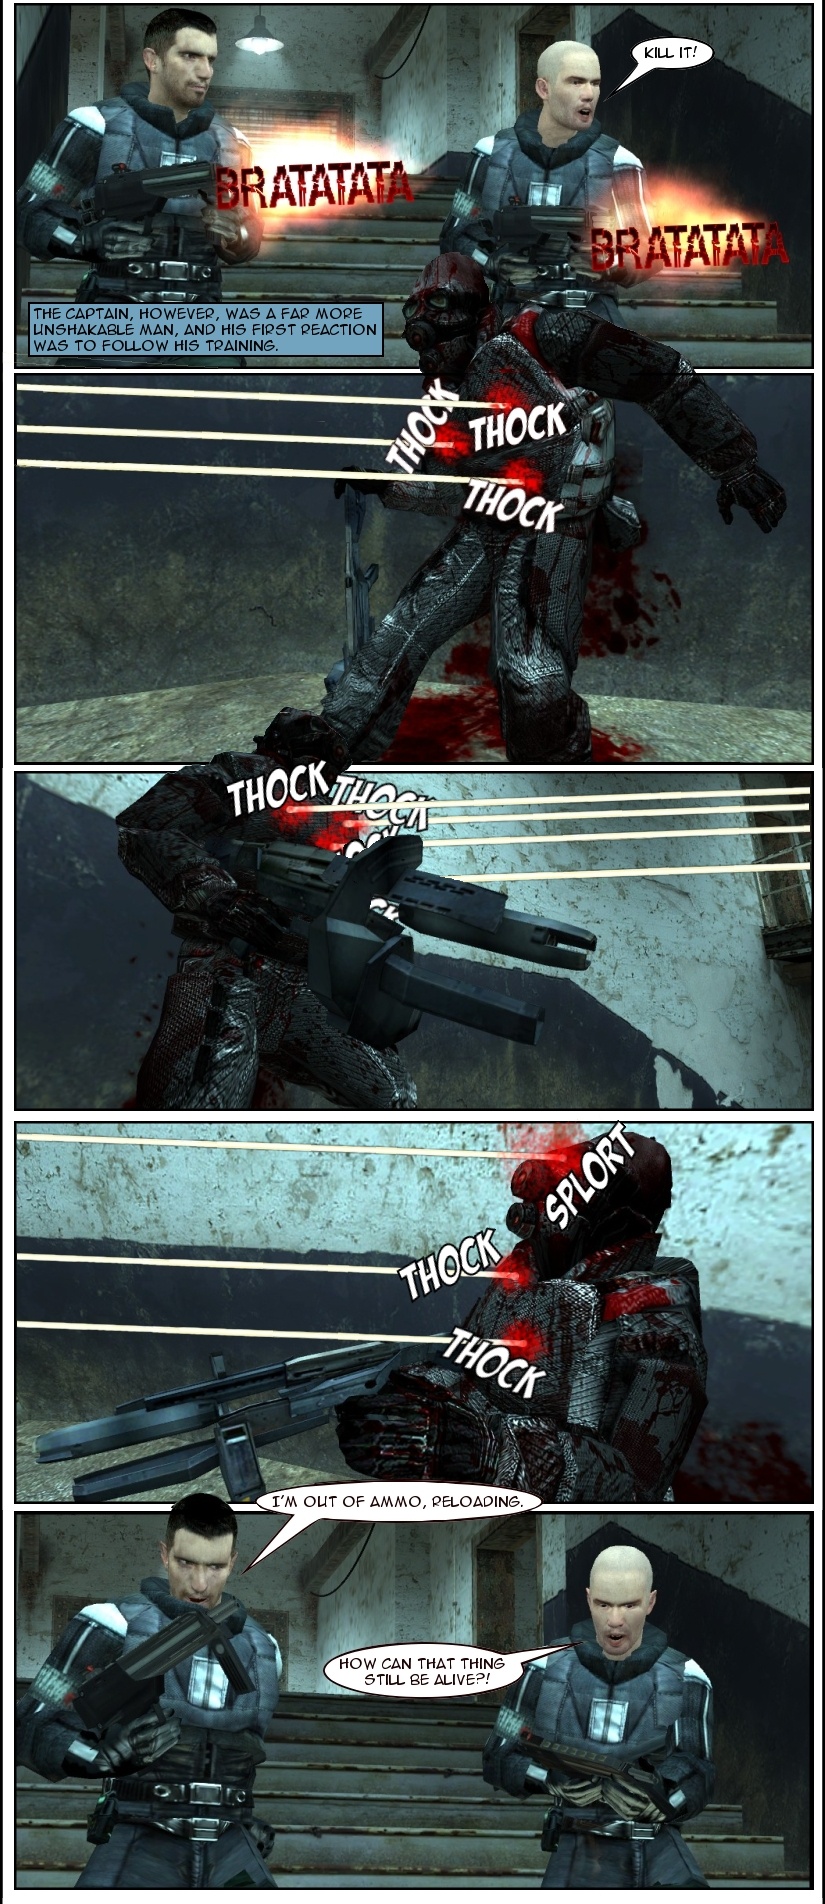 Sullivan screams at Jacobs to kill it and both start unloading their submachine guns on the apparently undead Combine soldier. They shoot multiple bullets into the soldier, from the chest up to the head, but to no avail. Jacobs starts reloading while Sullivan stares at his own weapon, wondering how the soldier can still be alive.